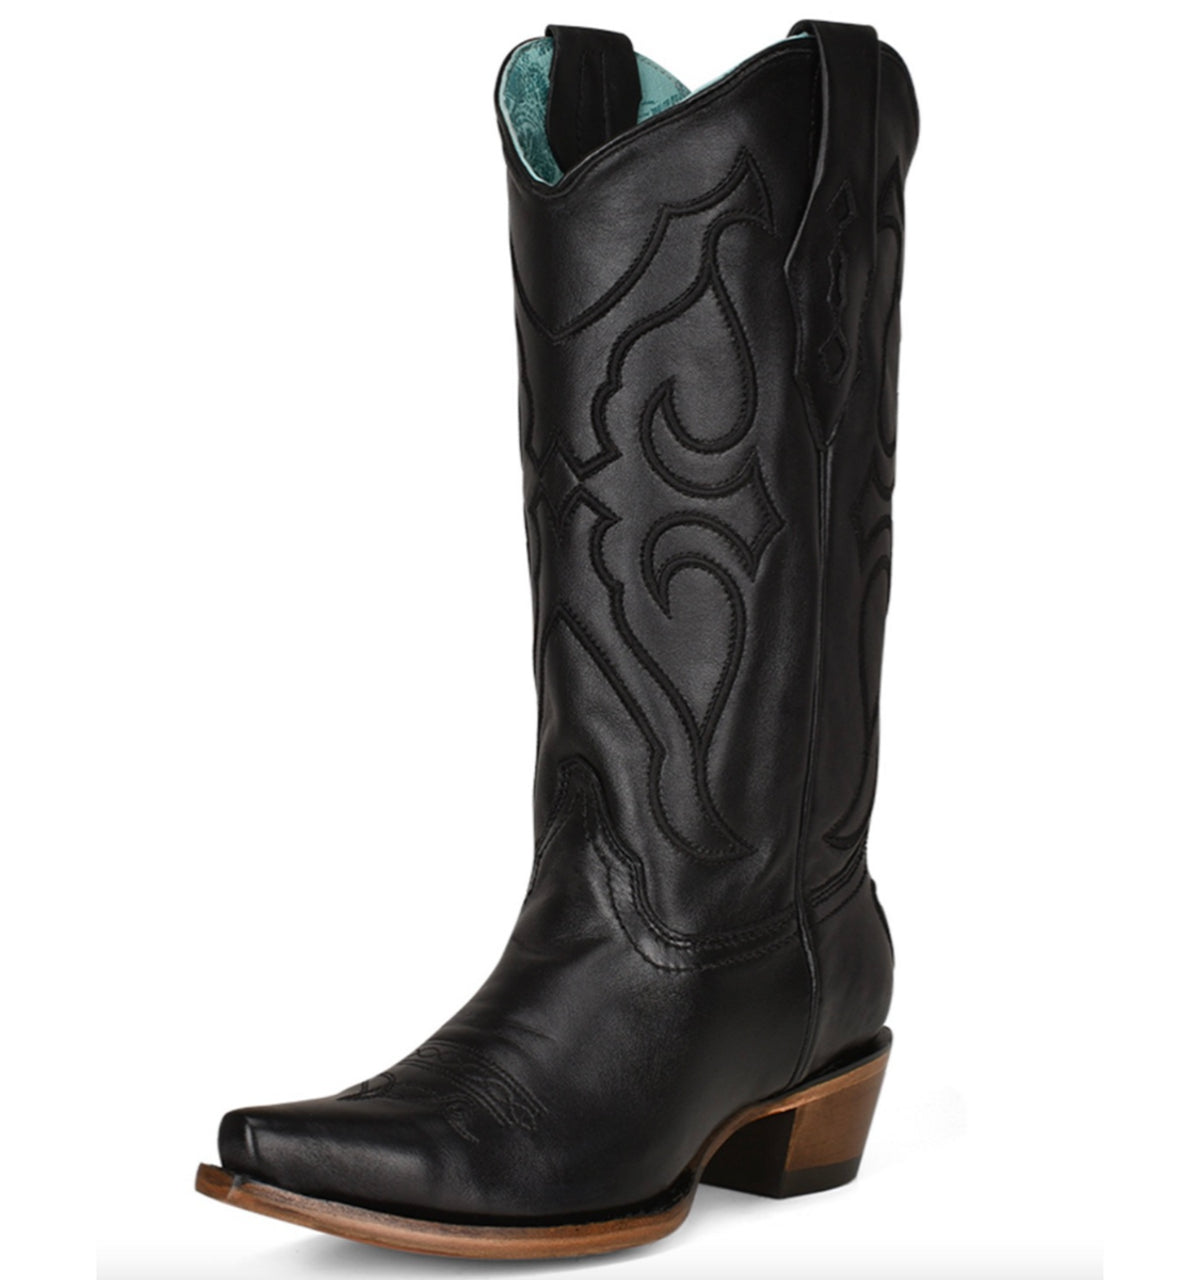 Corral Tall Top Stitch and Inlay Boot